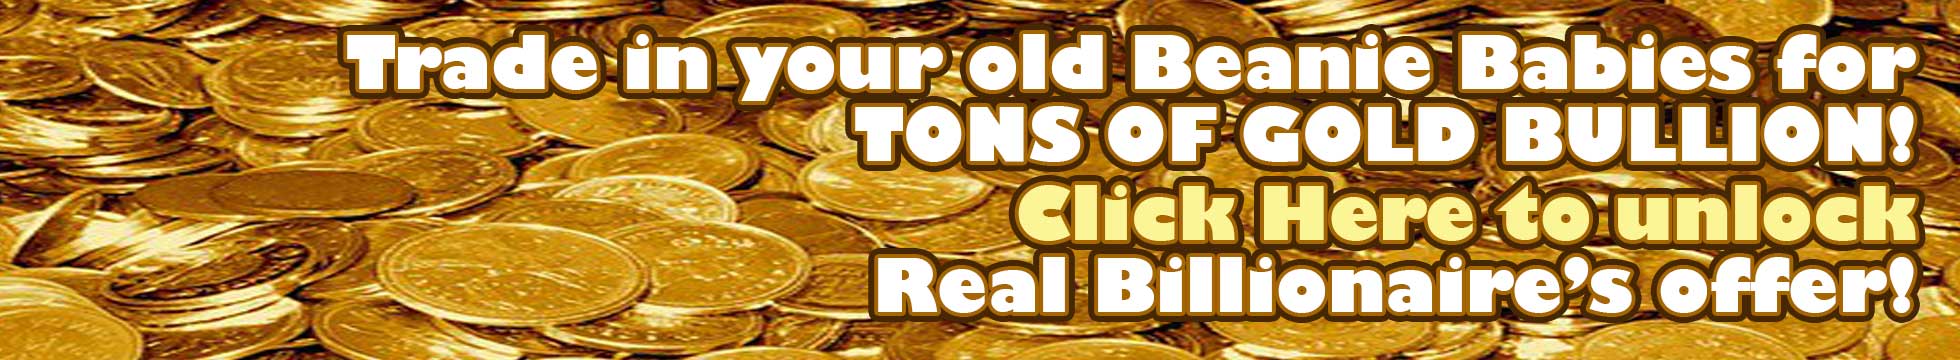 Fake ad for trade in your old beanie babies for tons of gold bullion, click here to unlock real billionaire's offer!